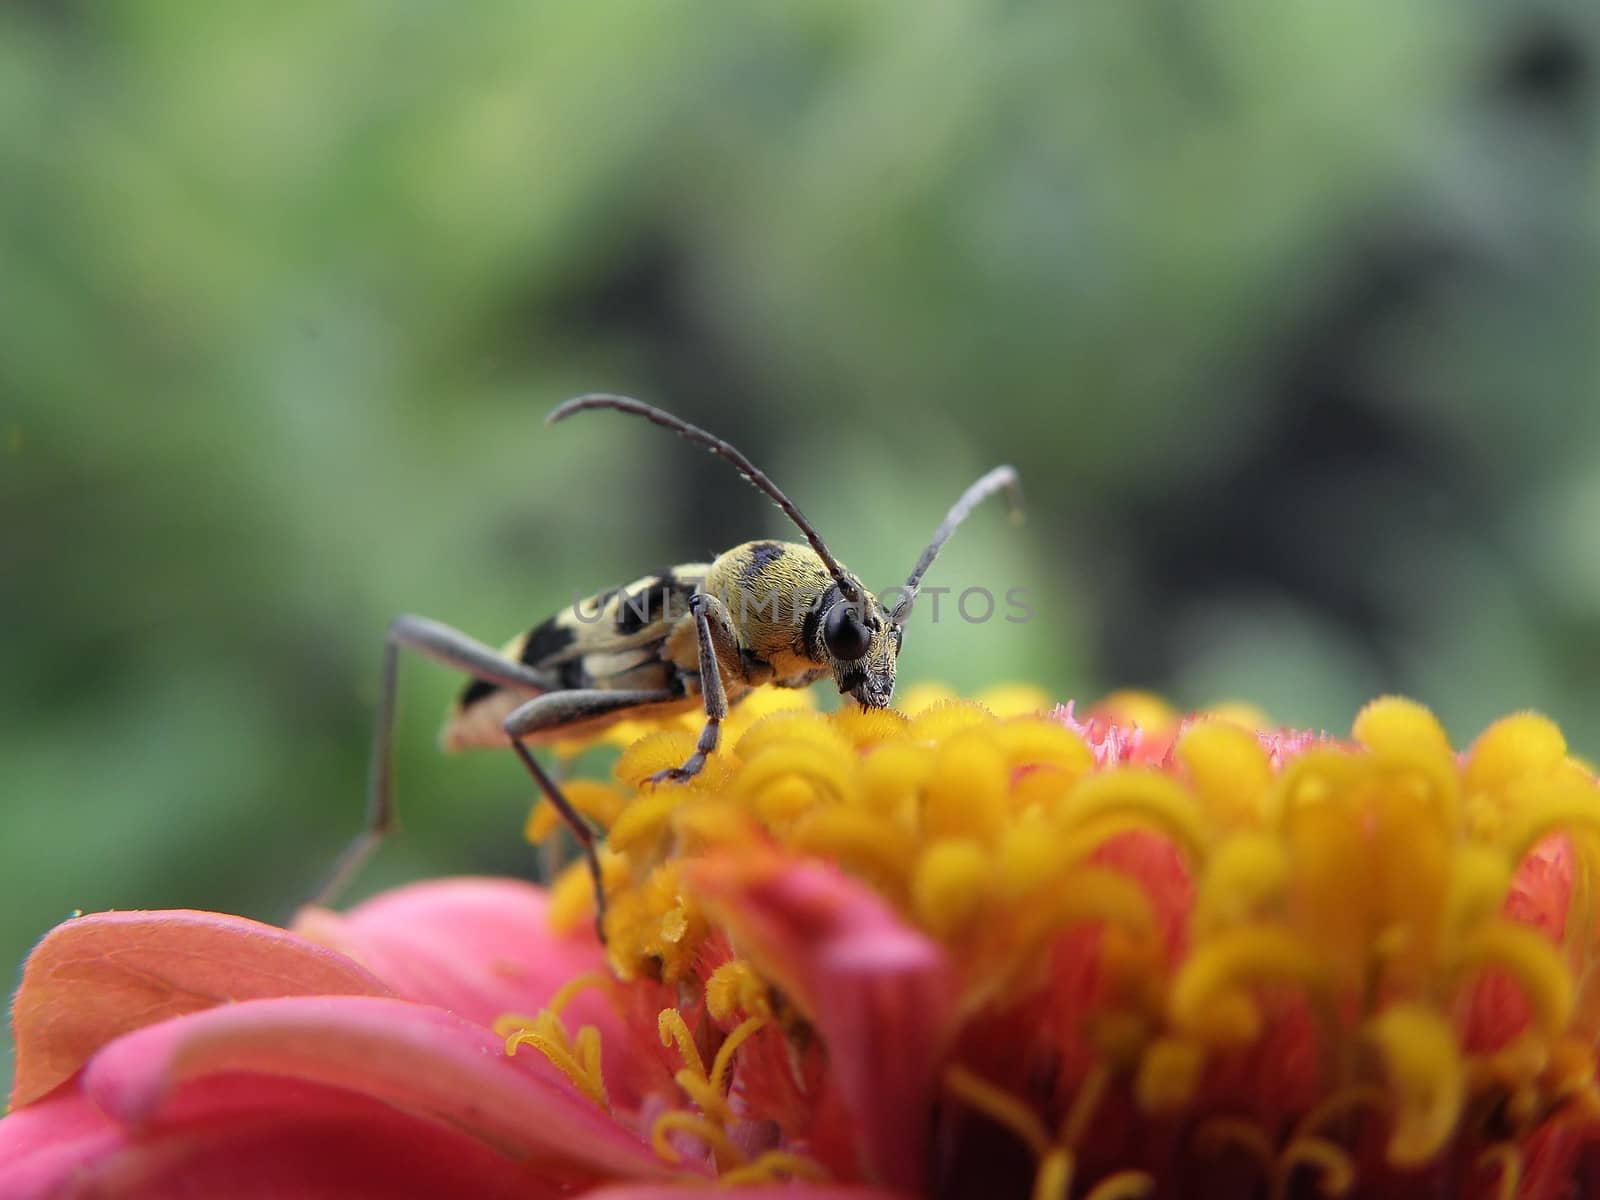 A longhorn beetle eating nectar from a flower.